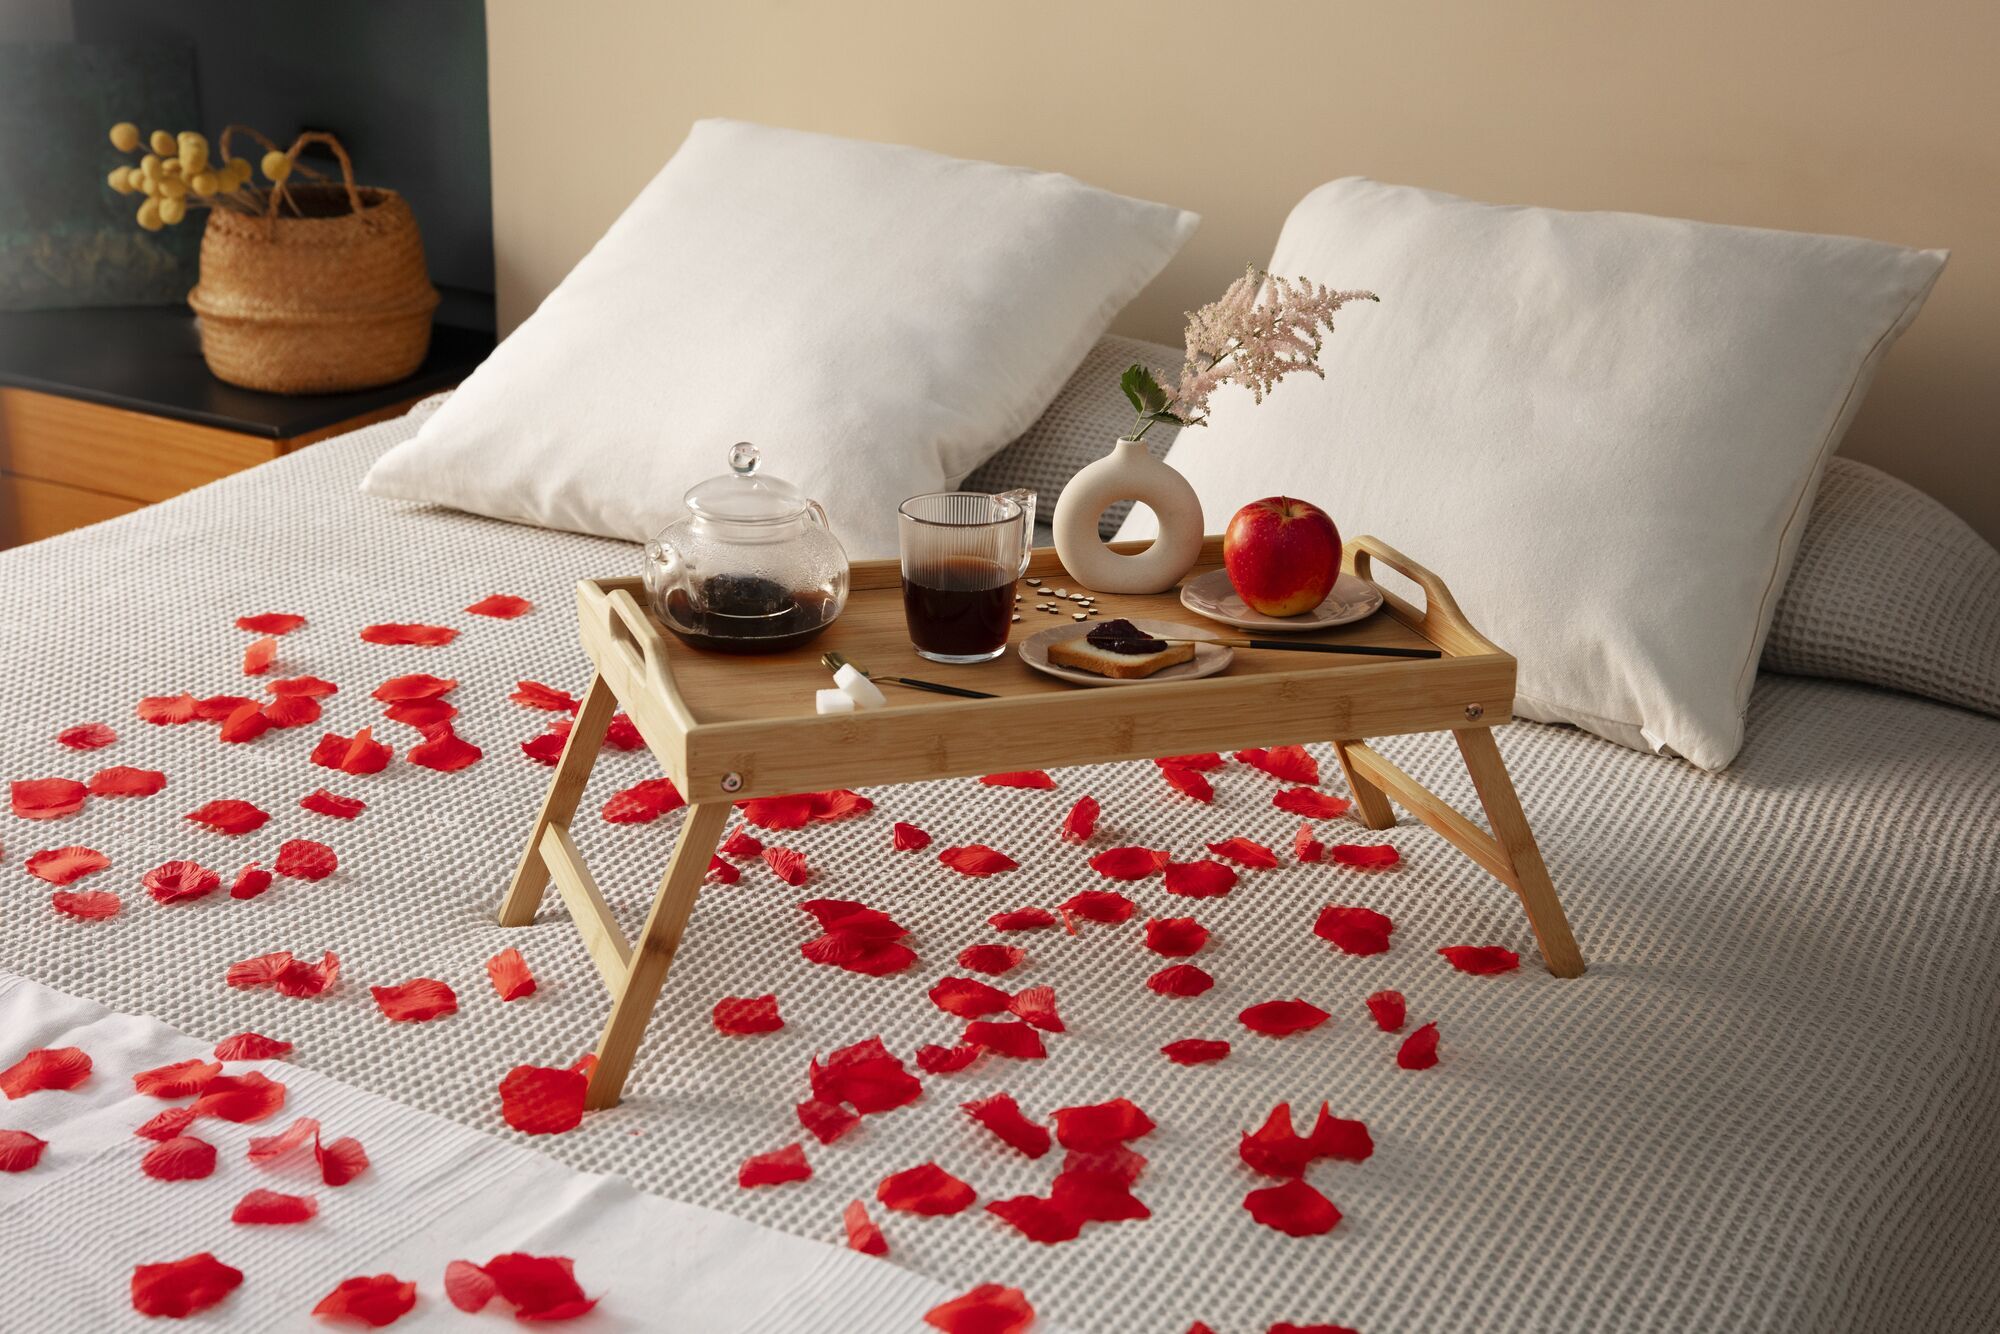 Top 12 romantic hotels in Los Angeles to add fresh emotions to your relationships